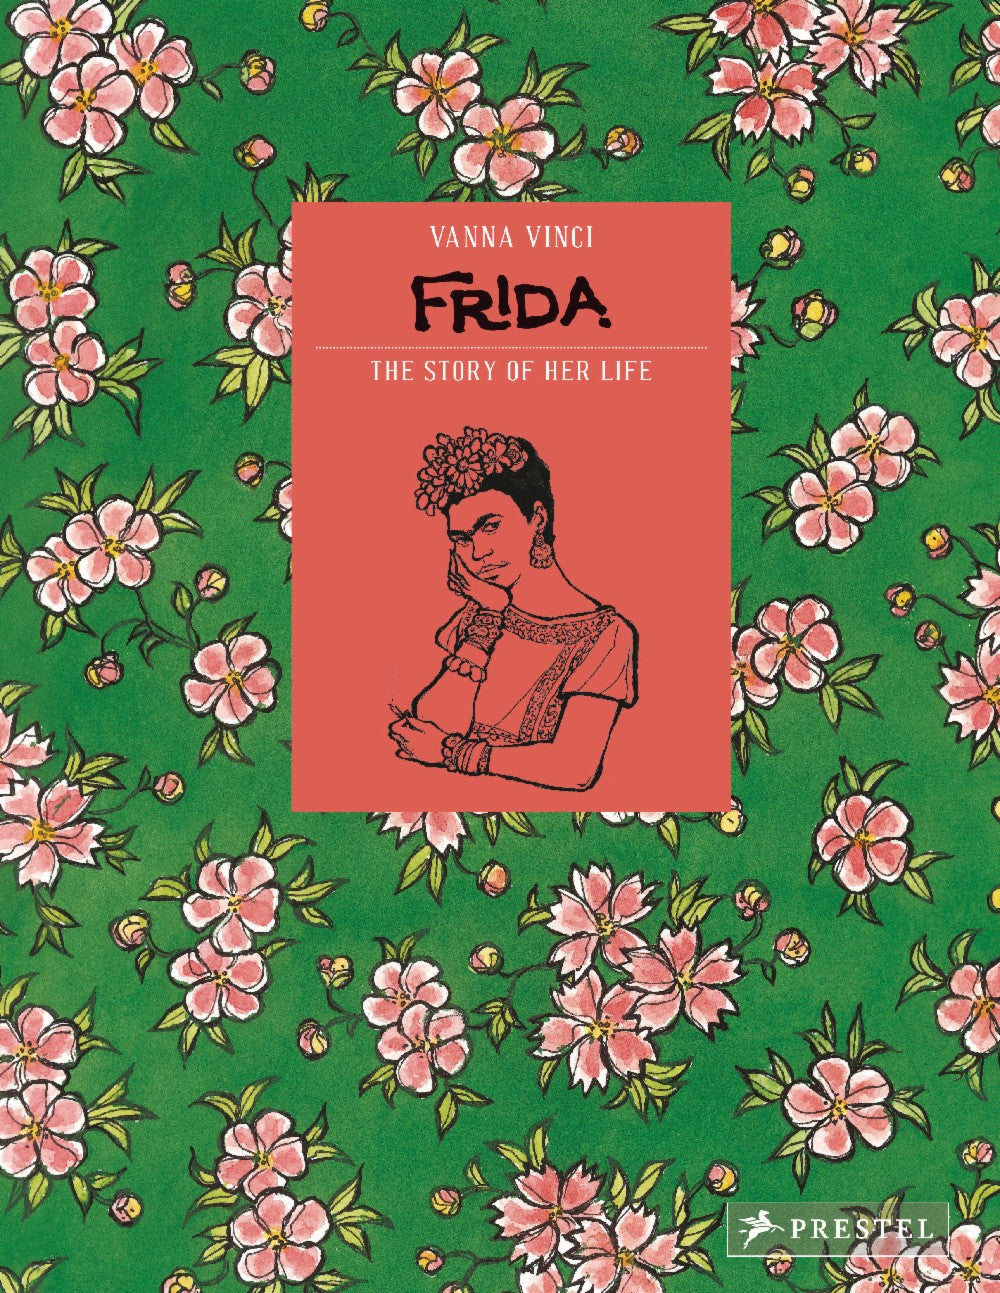 Frida Kahlo: The Story of Her Life by Vanna Vinci